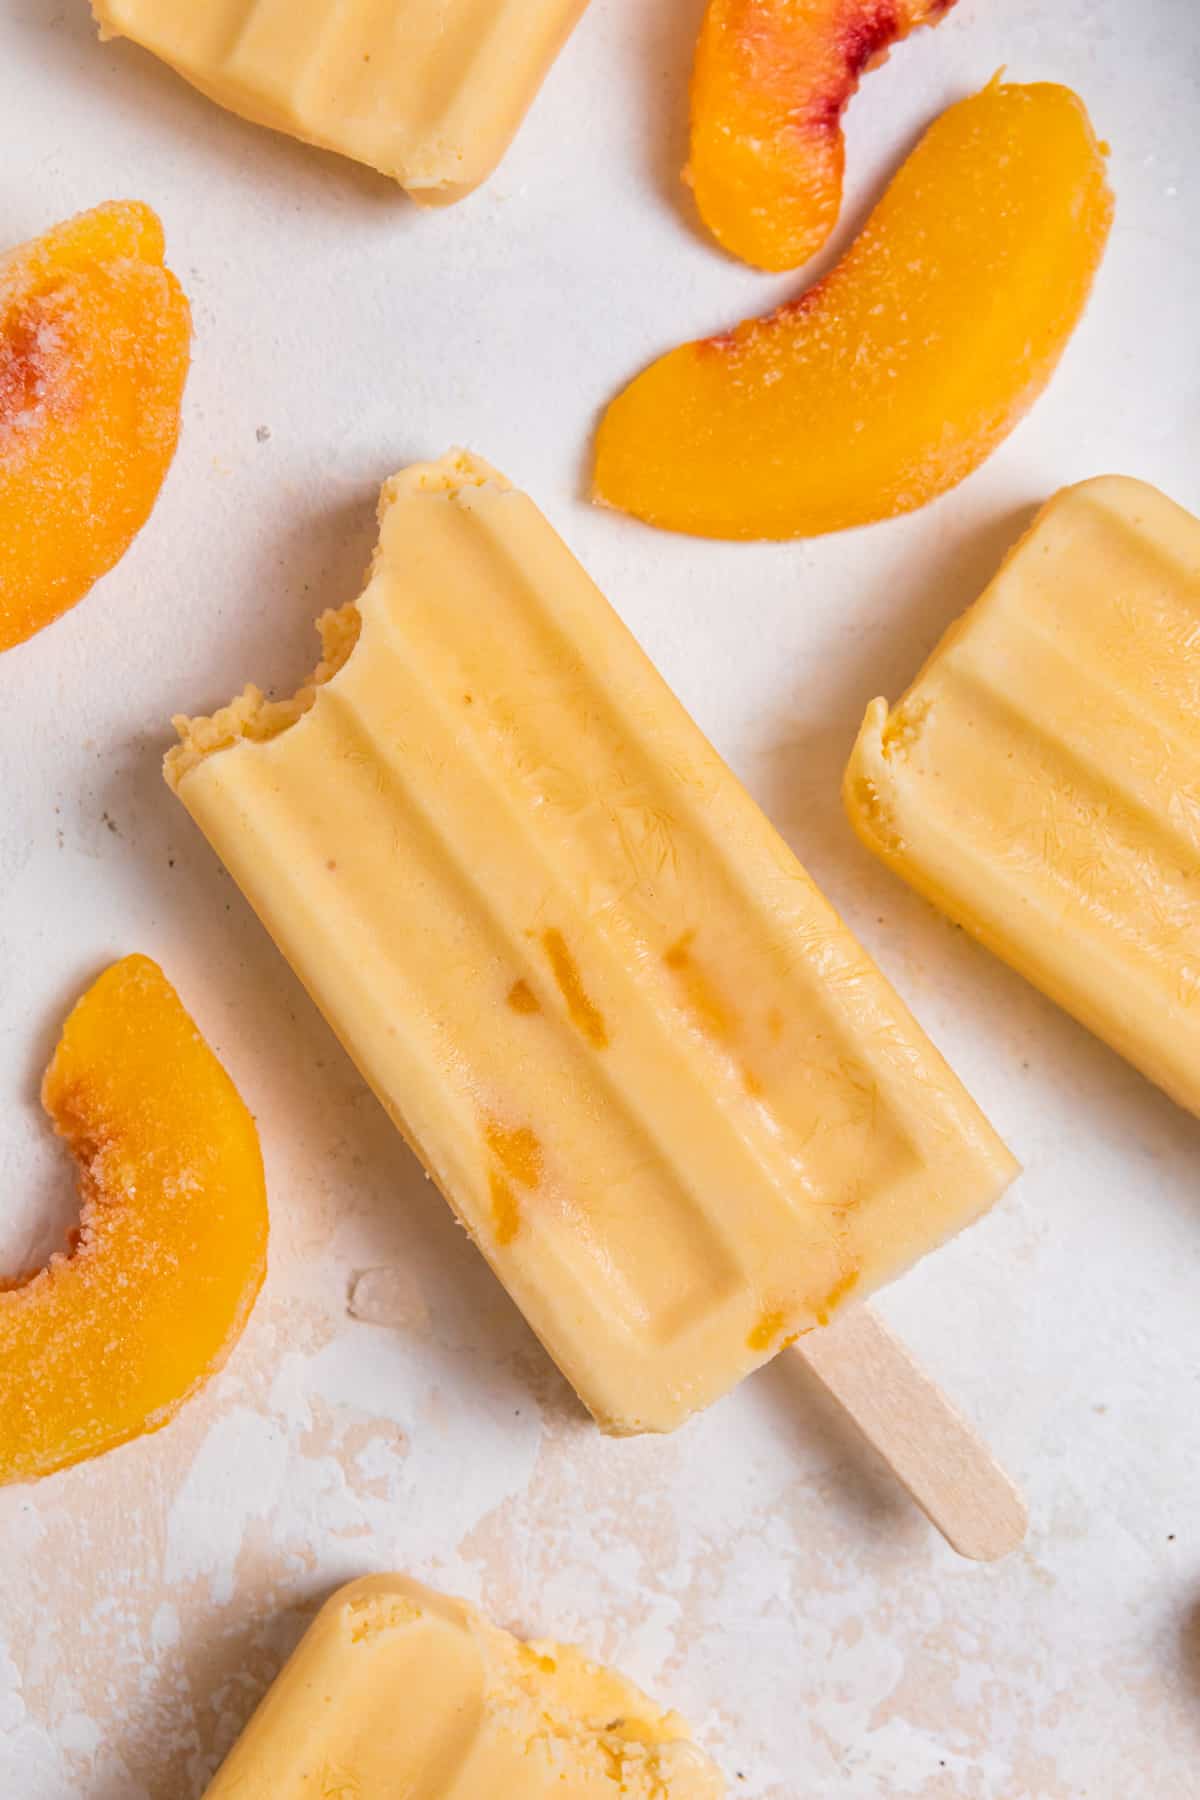 Peach popsicle on counter with peach slices surrounding.